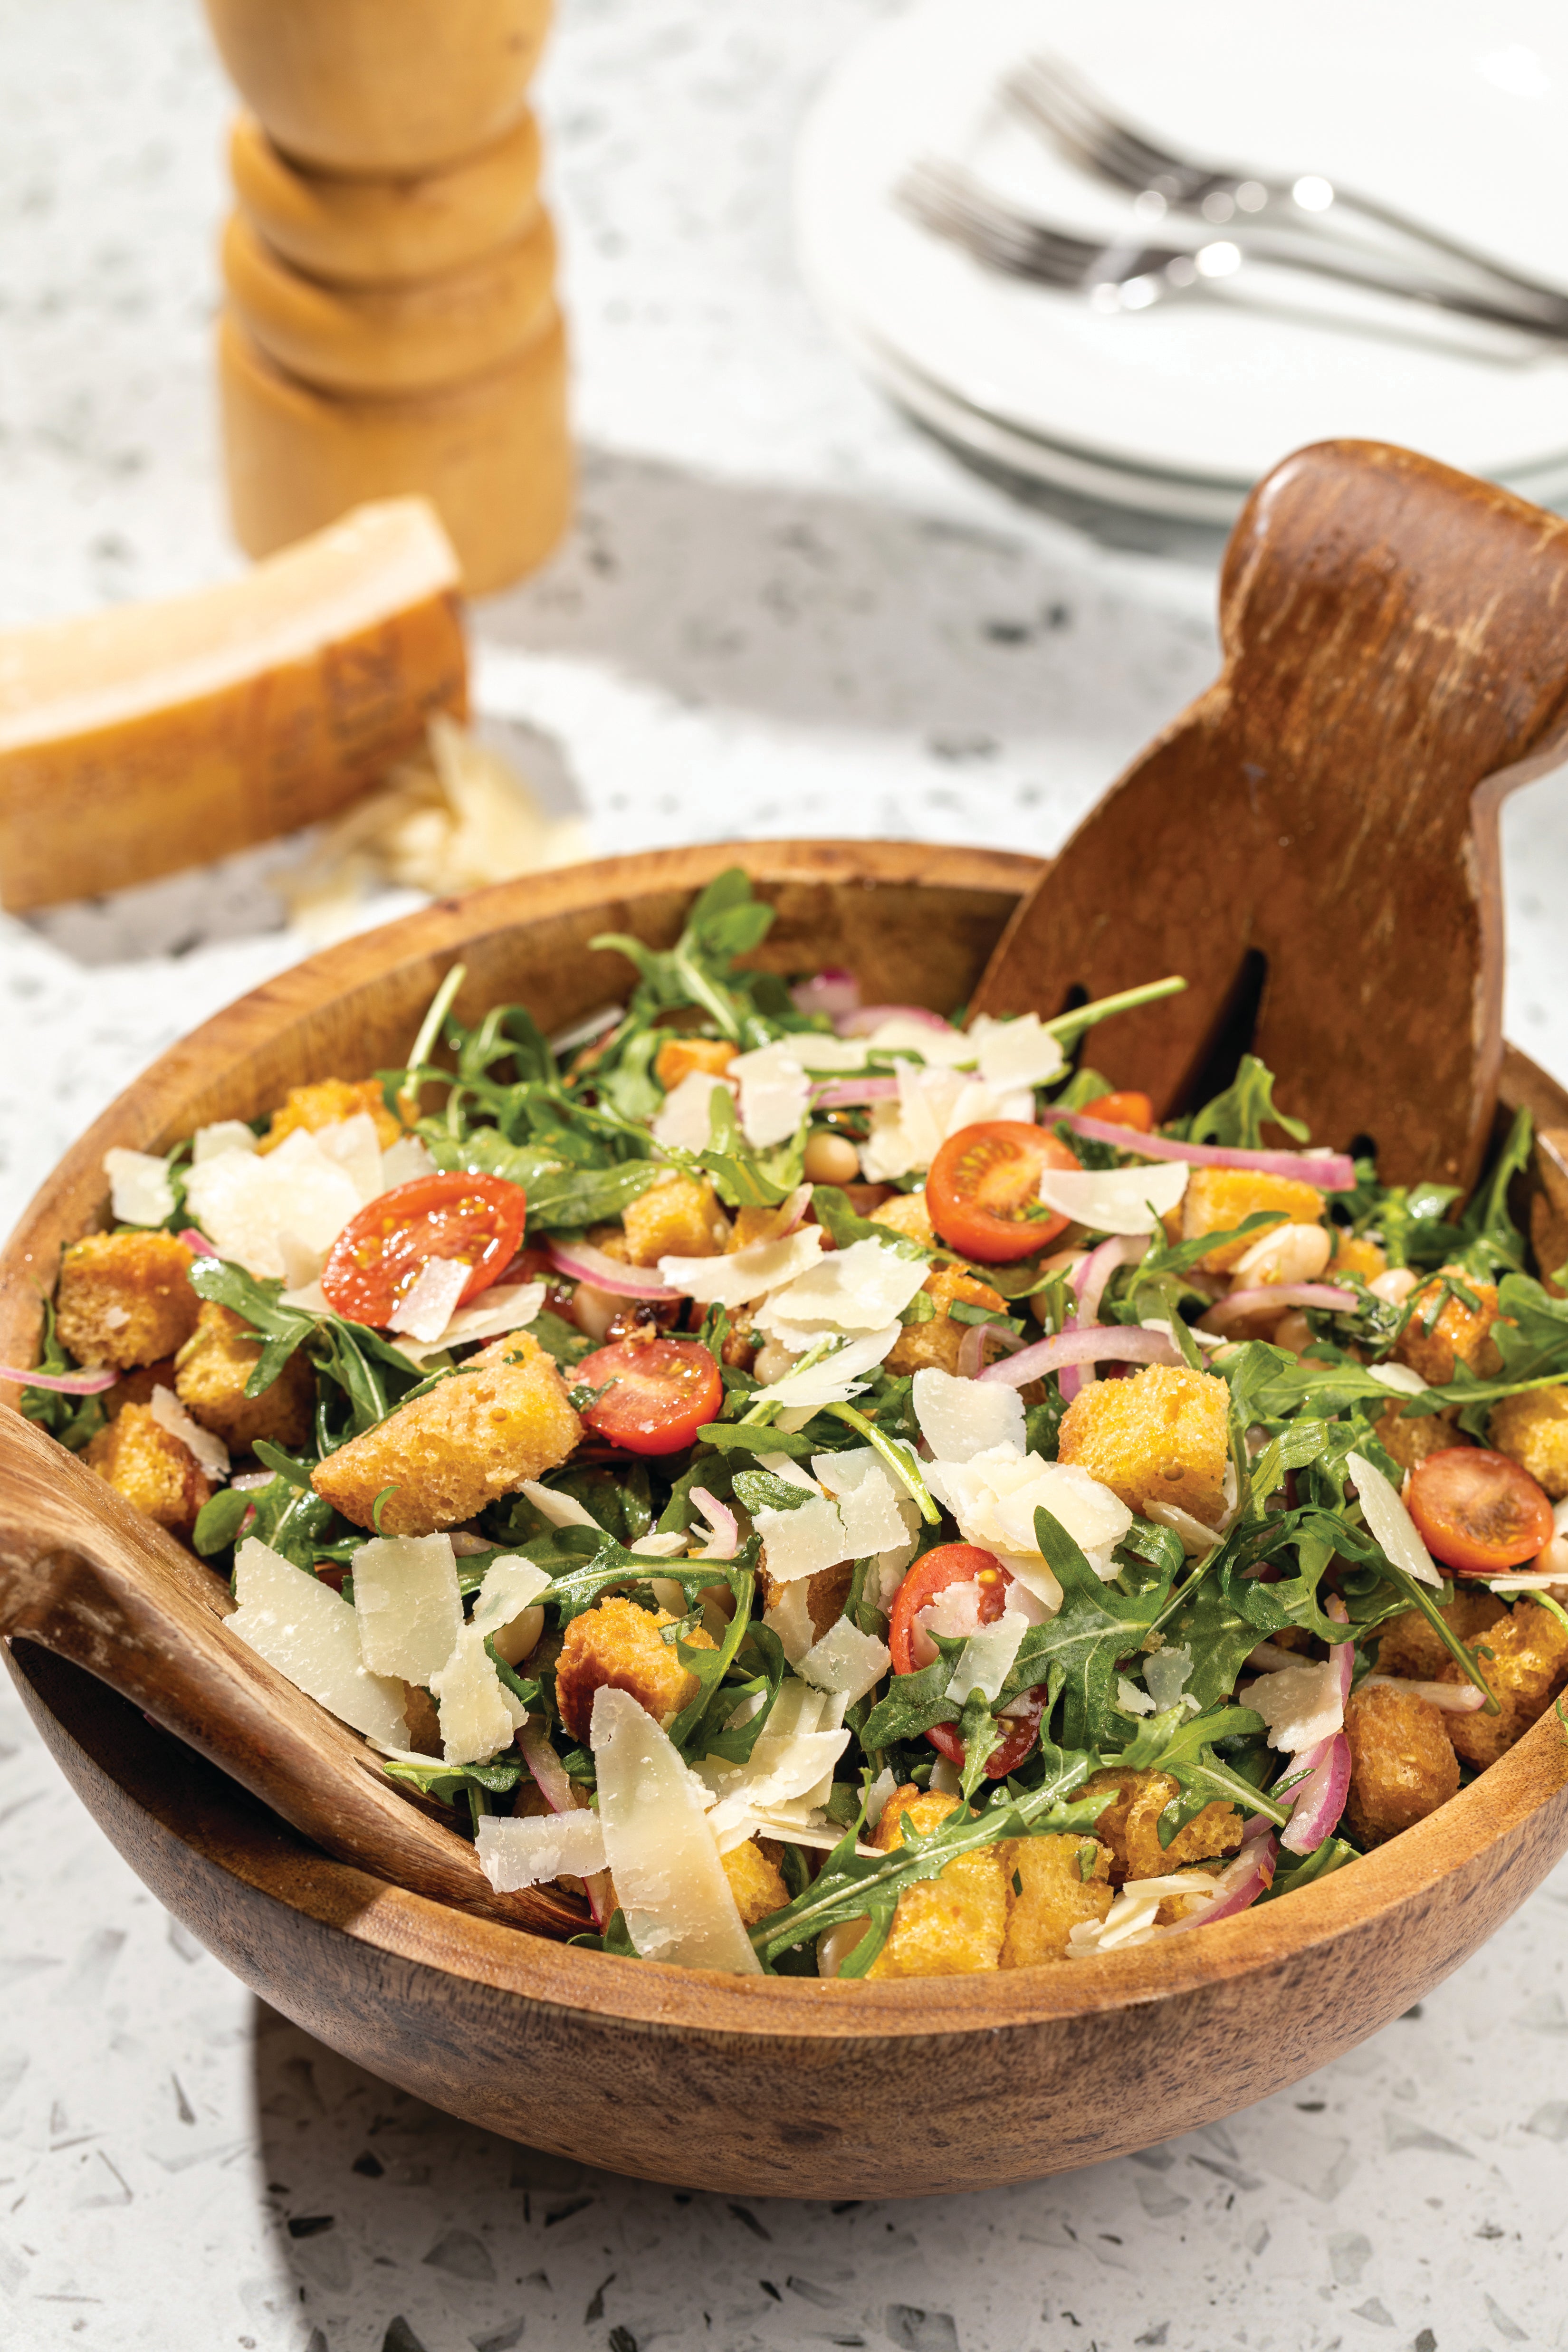 Easy and Nutritious Panzanella Salad Recipe Ready in 15 Minutes